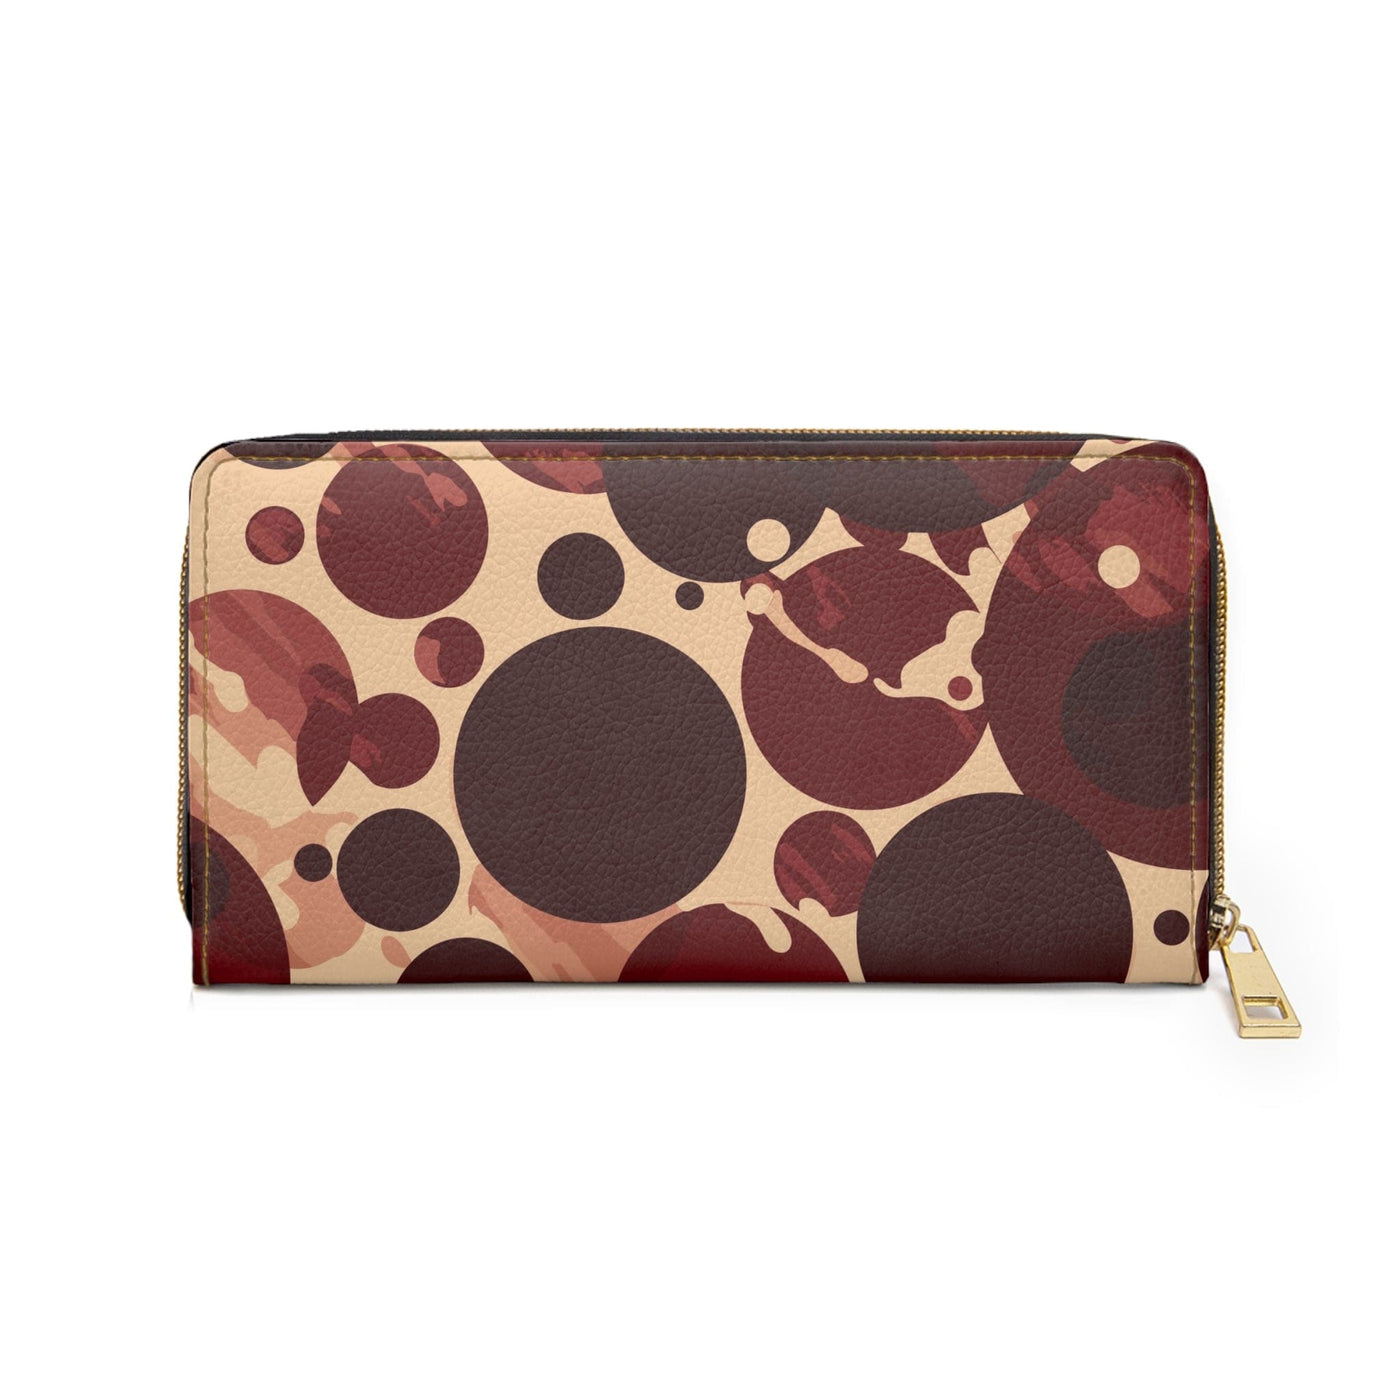 Burgundy And Beige Circular Spotted Illustration Womens Zipper Wallet Clutch